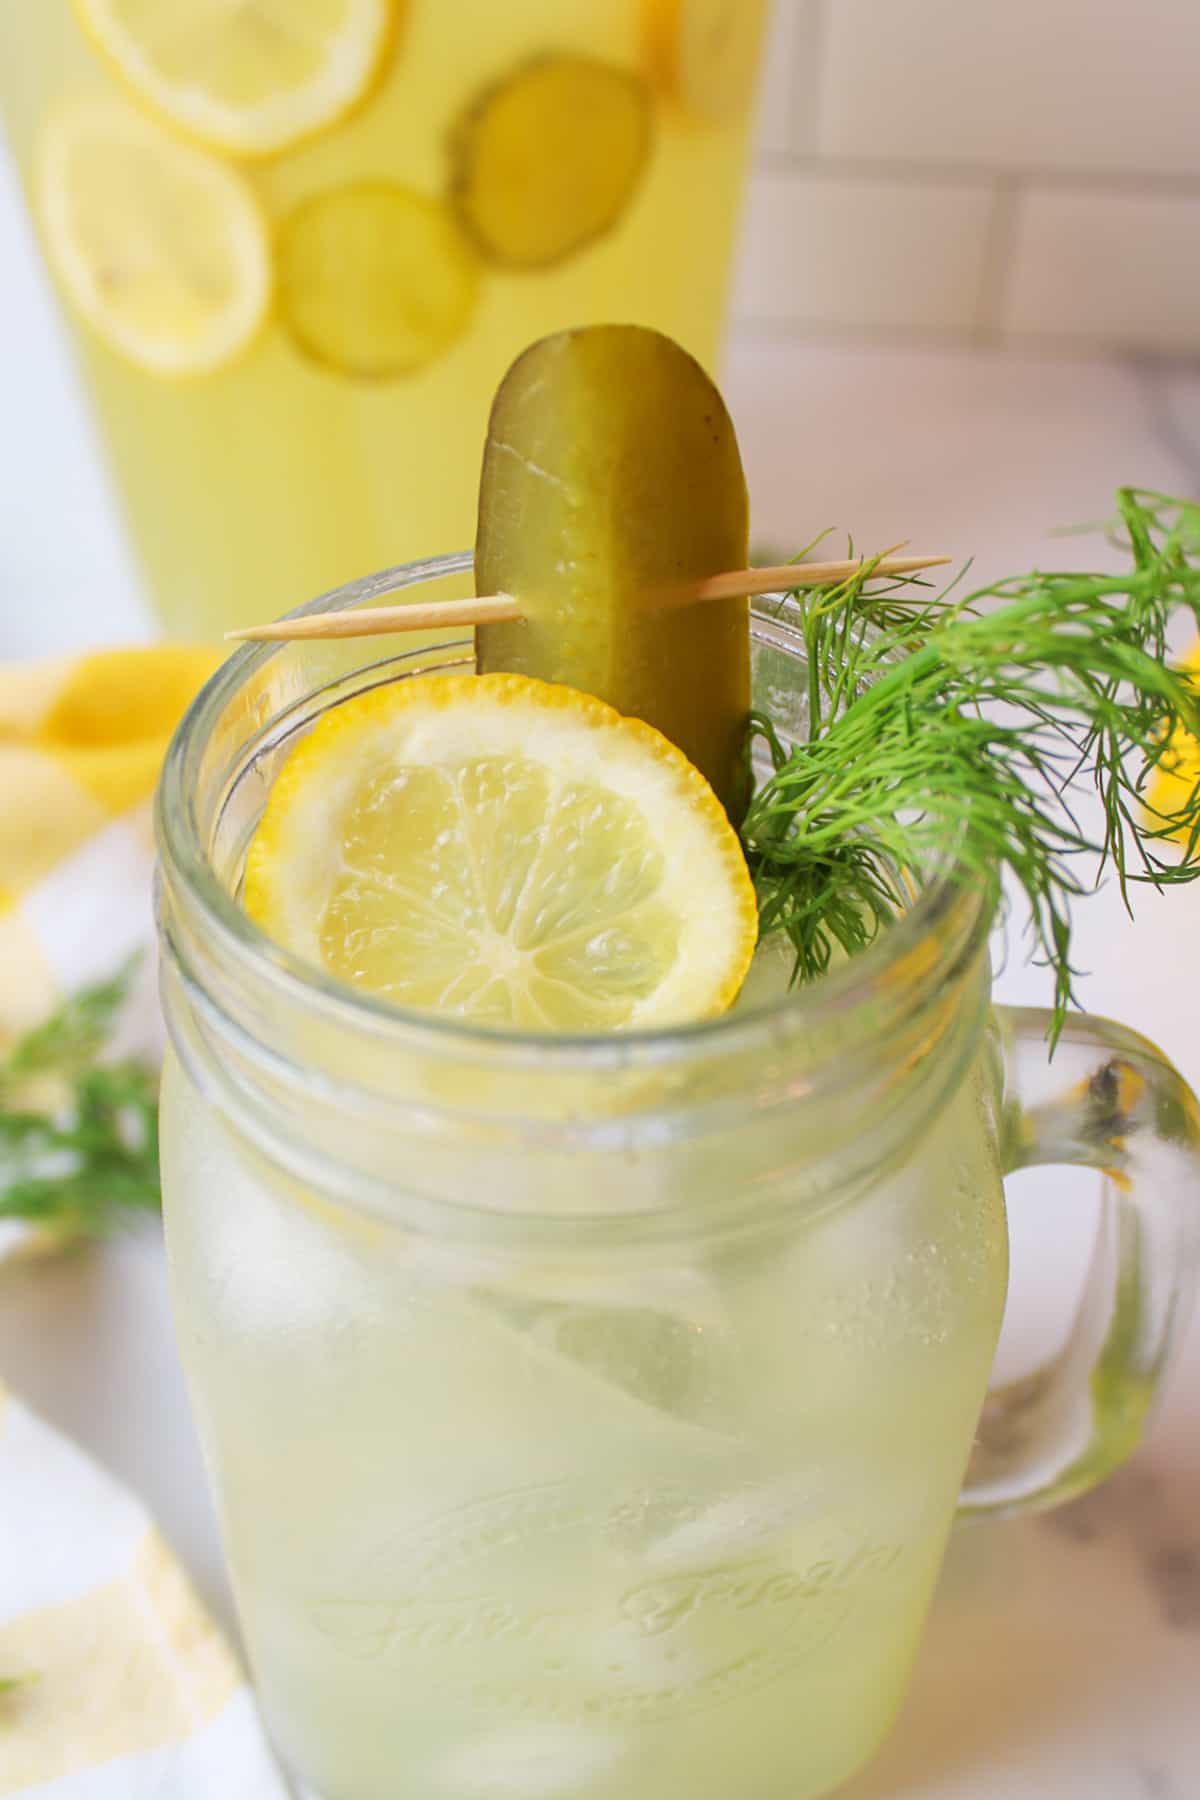 a glass of pickle lemonade garnished with lemon slice a pickle spear and dill weed.